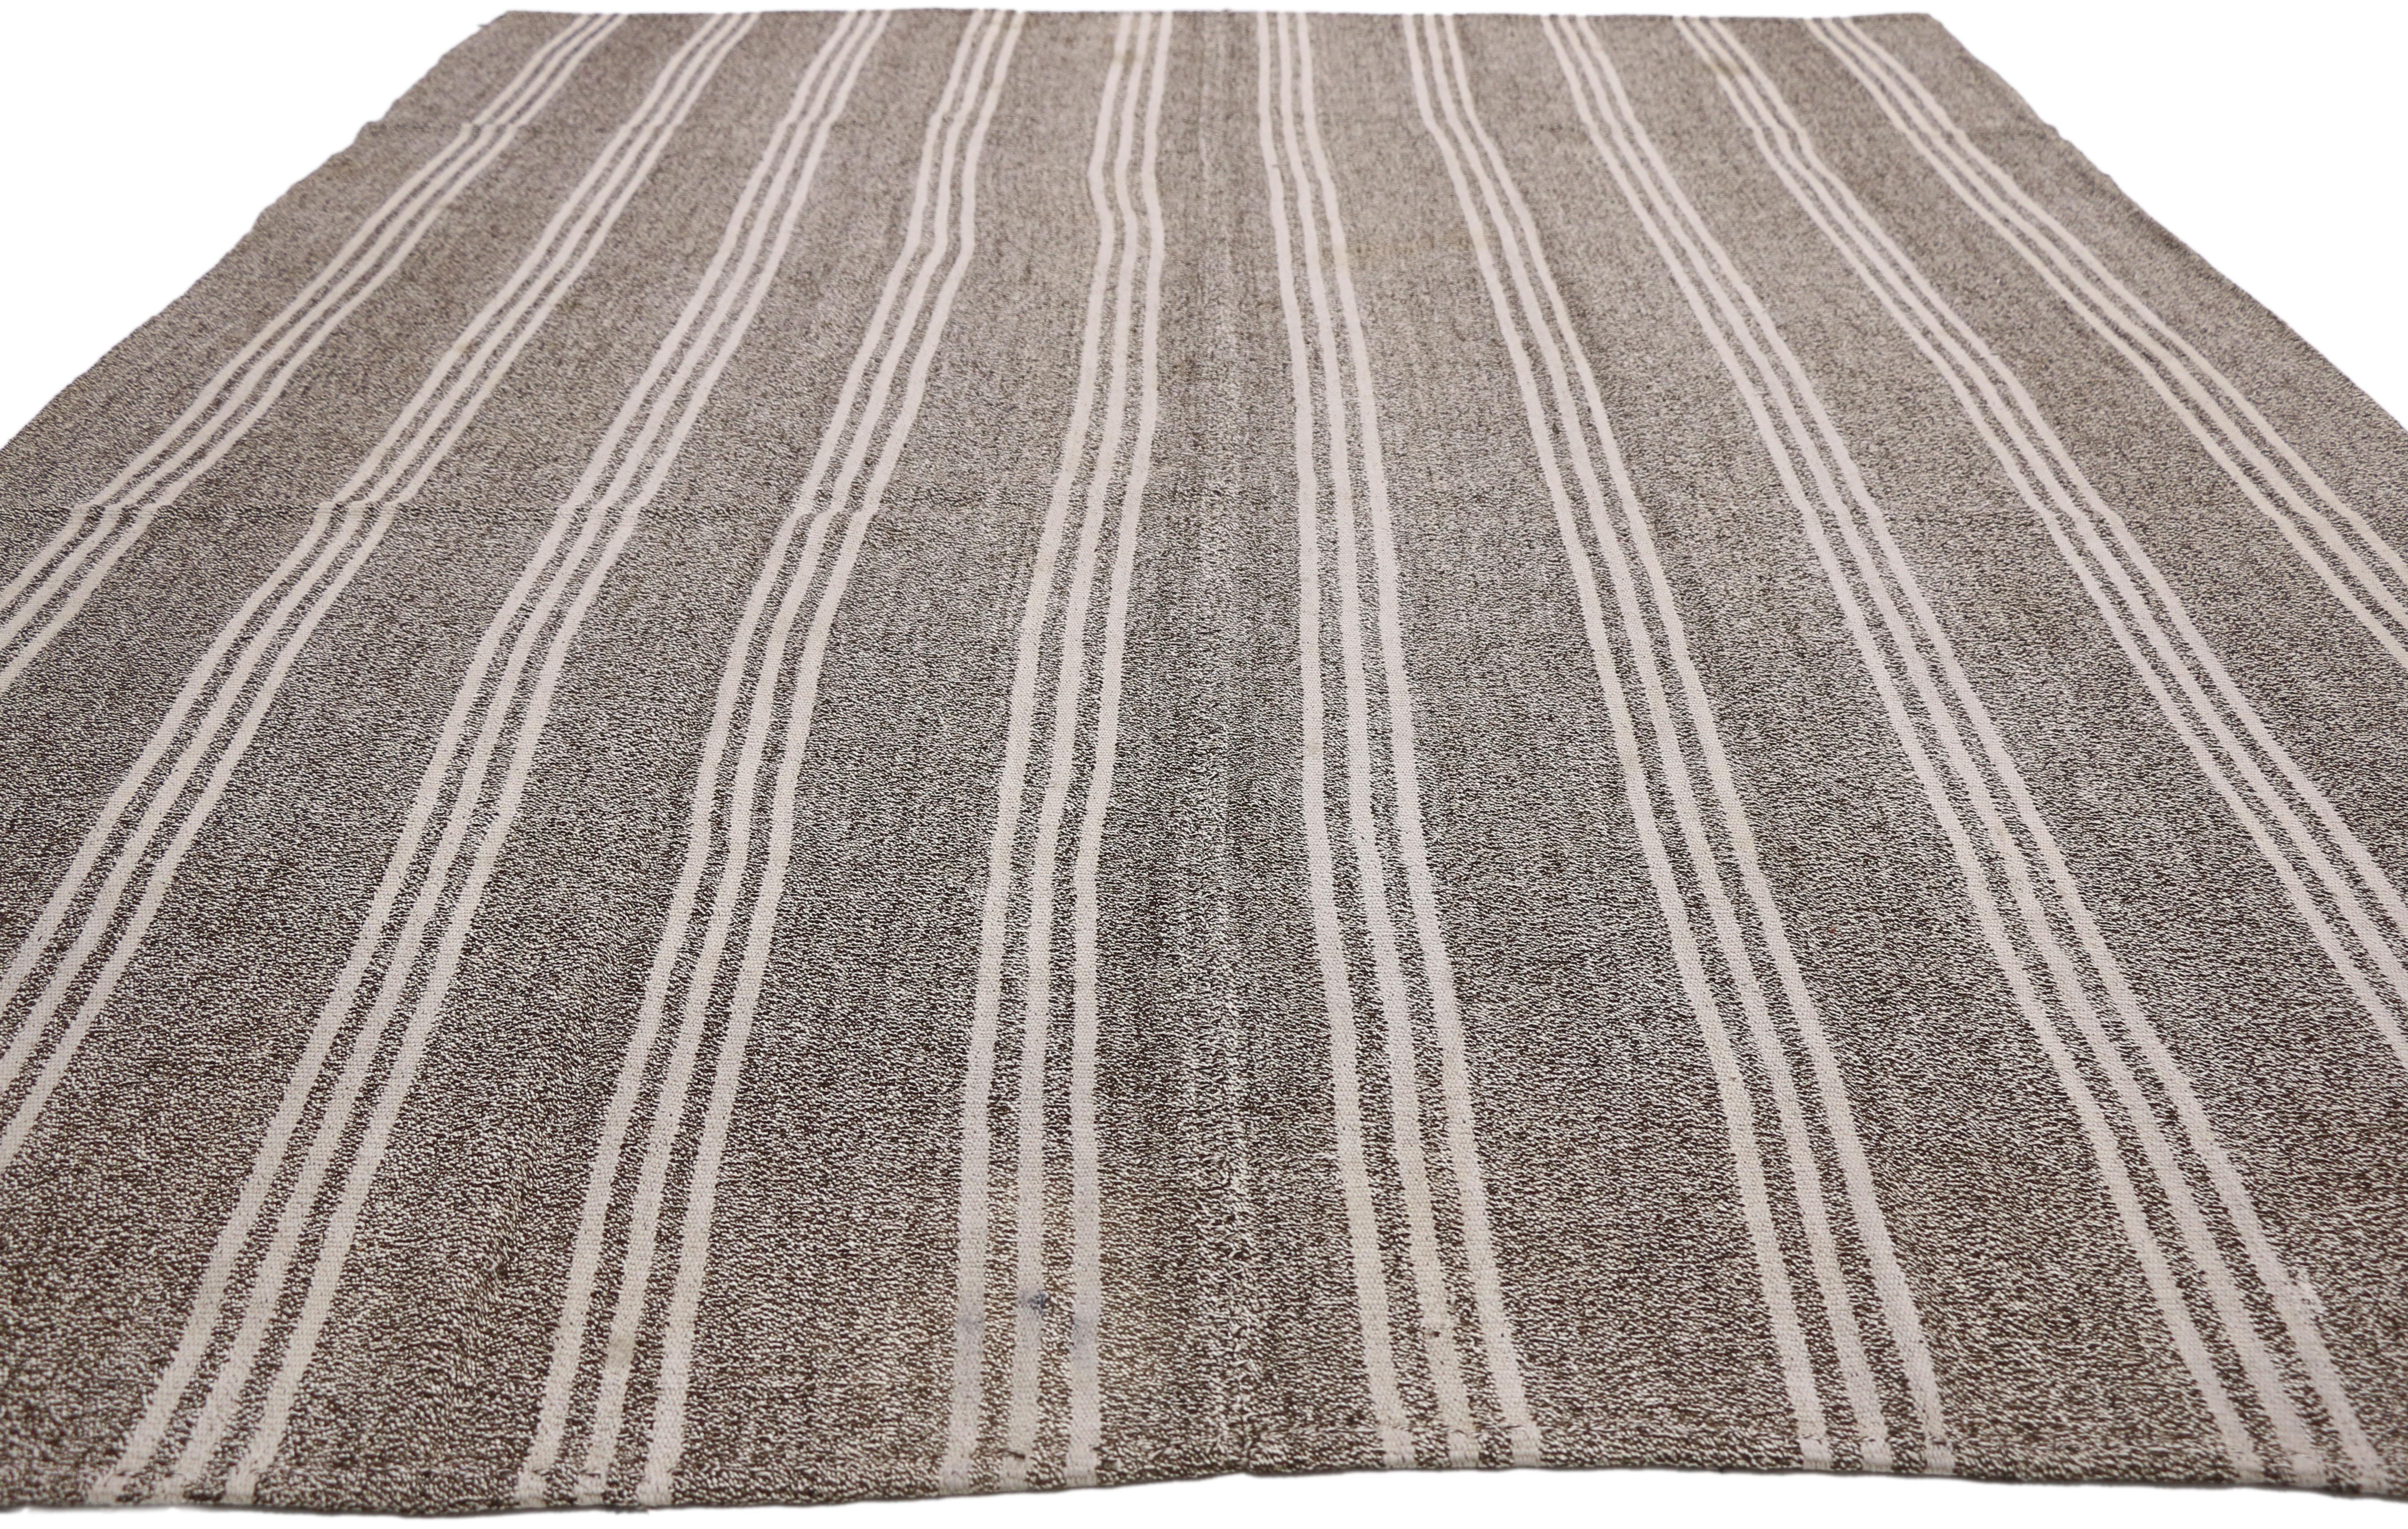 Hand-Woven Vintage Turkish Striped Kilim Area Rug with Modern Industrial Style For Sale